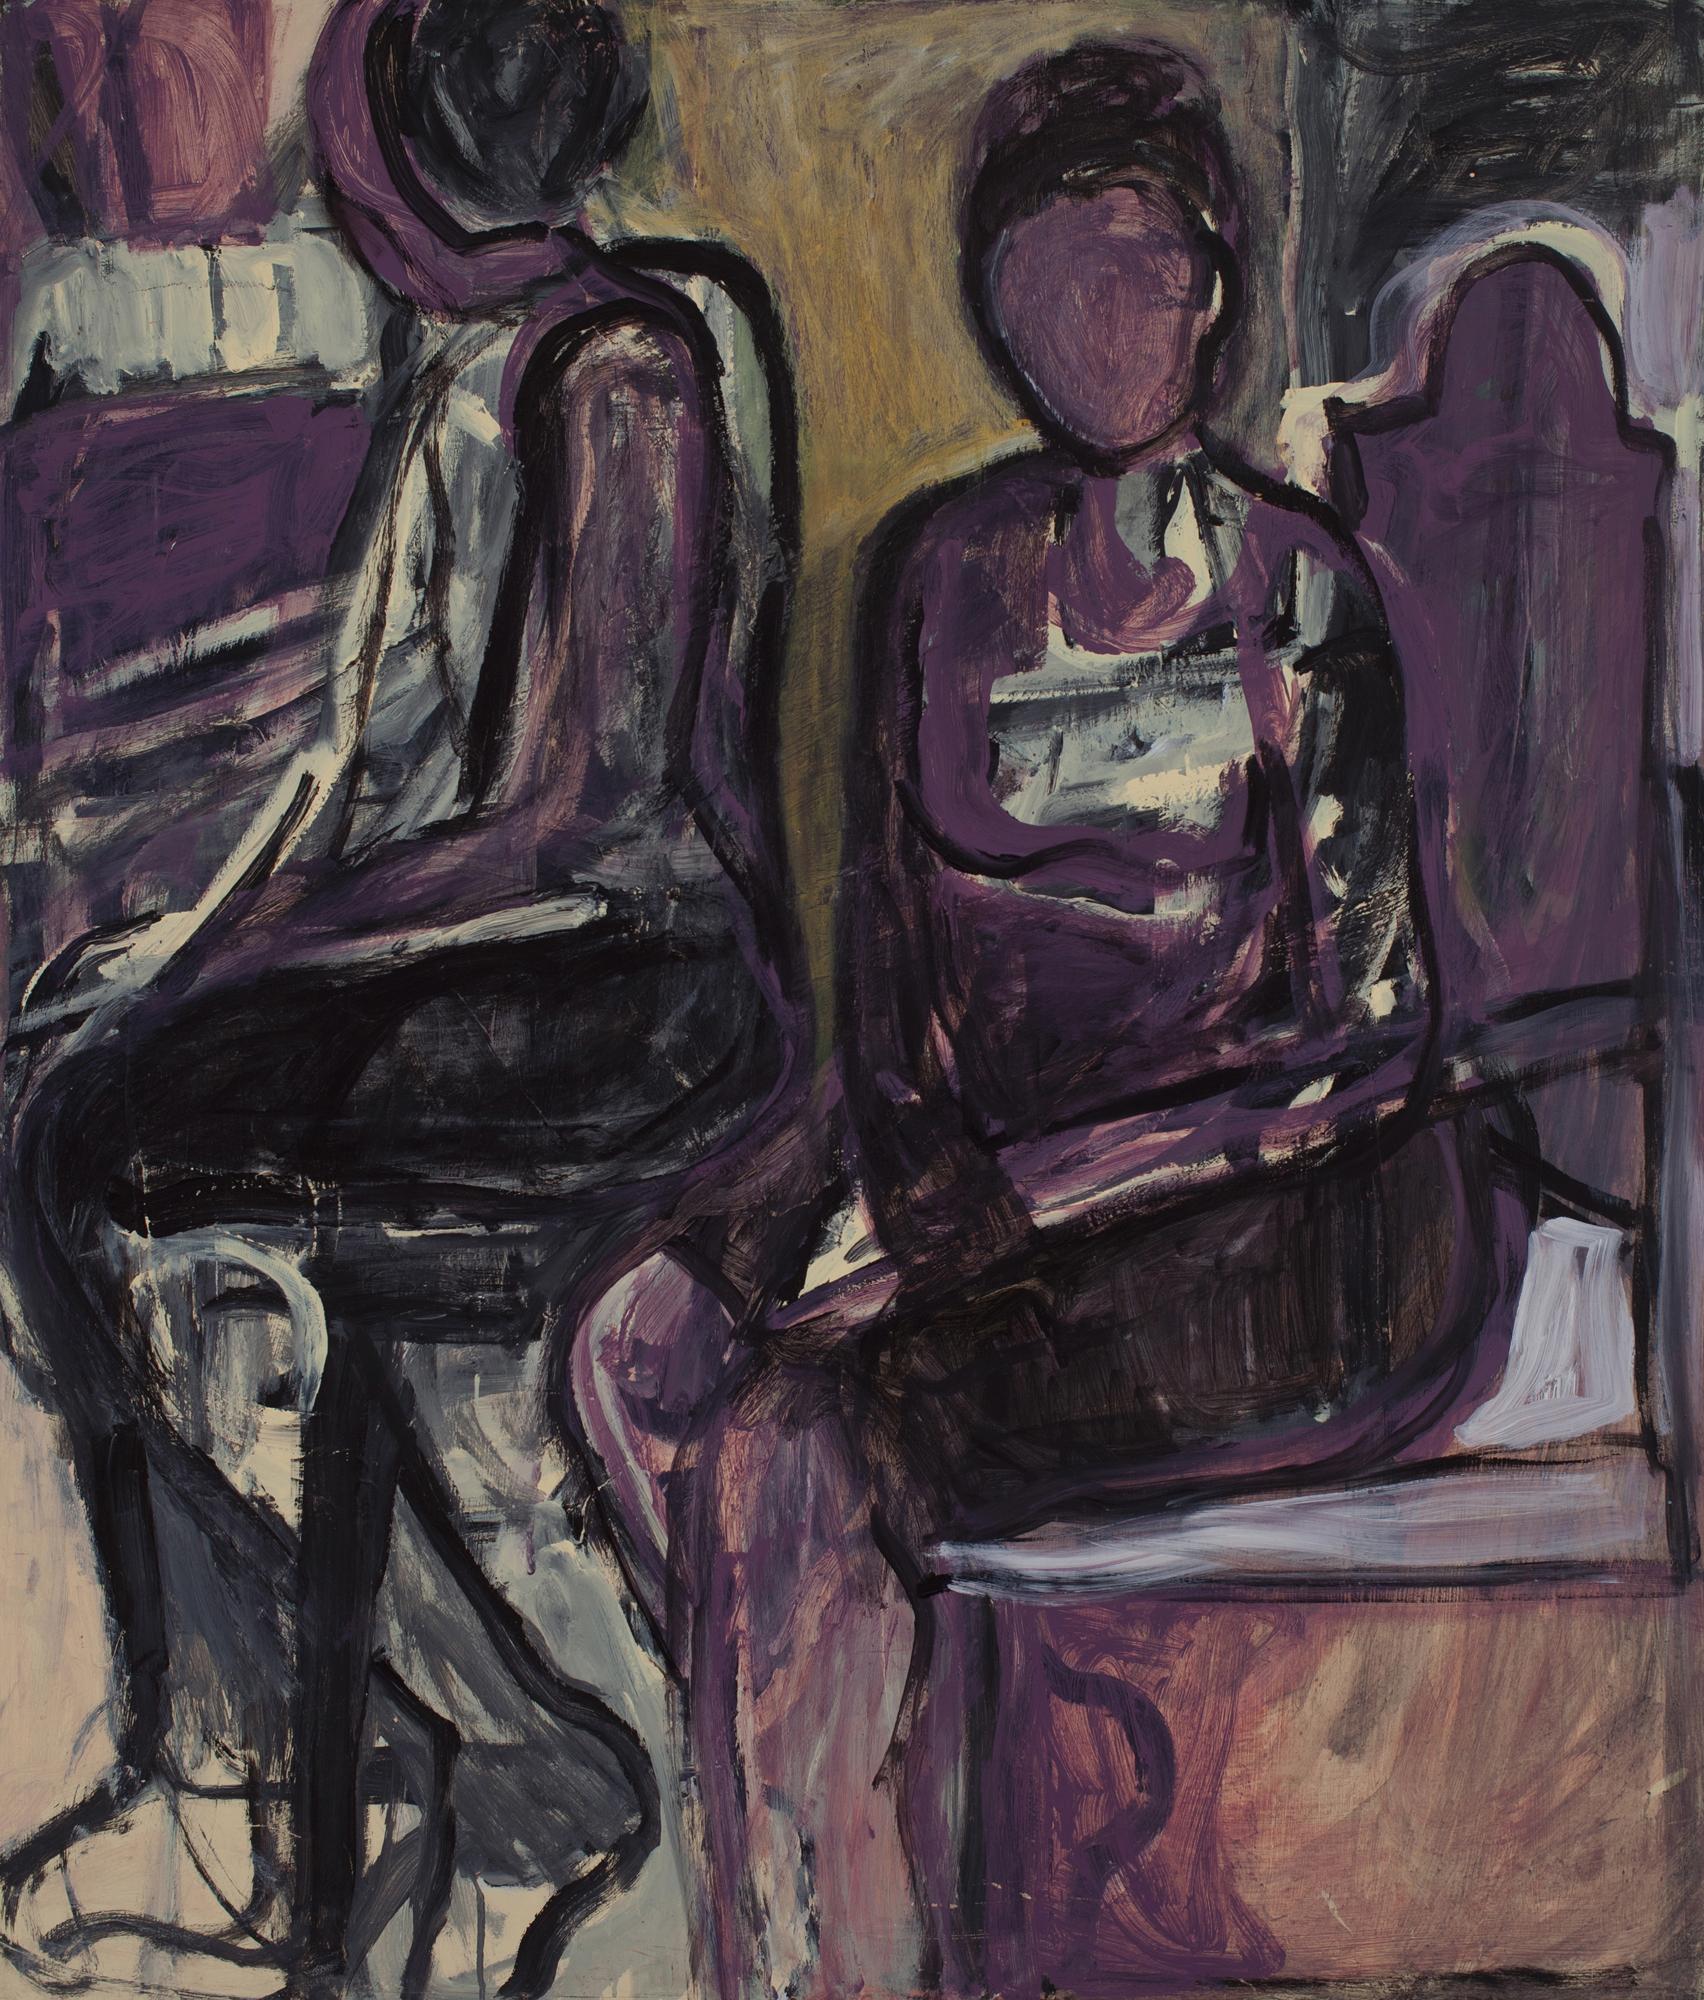 Karen Kosoglad’s figurative paintings capture women during their
introspective moments. Her expressive style, sometimes monochromatic,
sometimes colorful, reveals her interest in what she describes as “the gestural
moments in everyday life and the